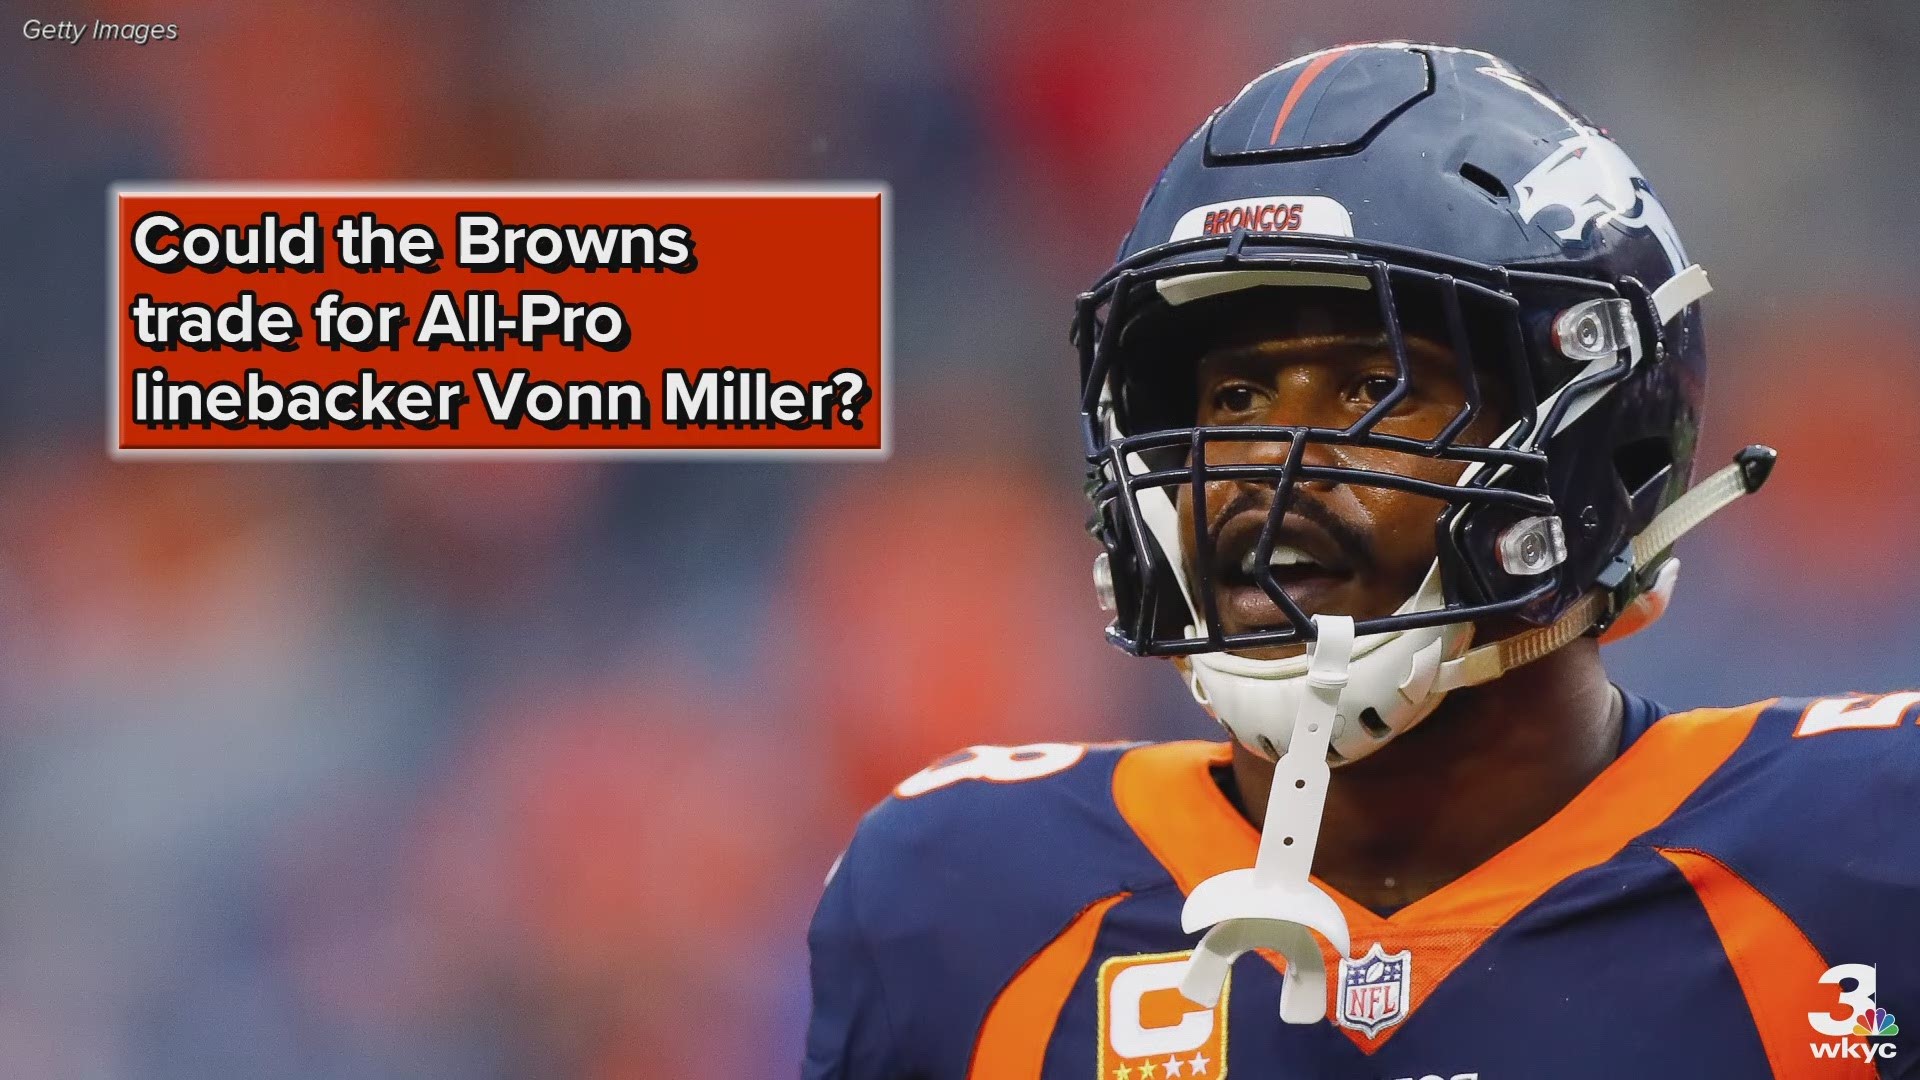 Could the Cleveland Browns work a trade to acquire Denver Broncos All-Pro linebacker Von Miller?